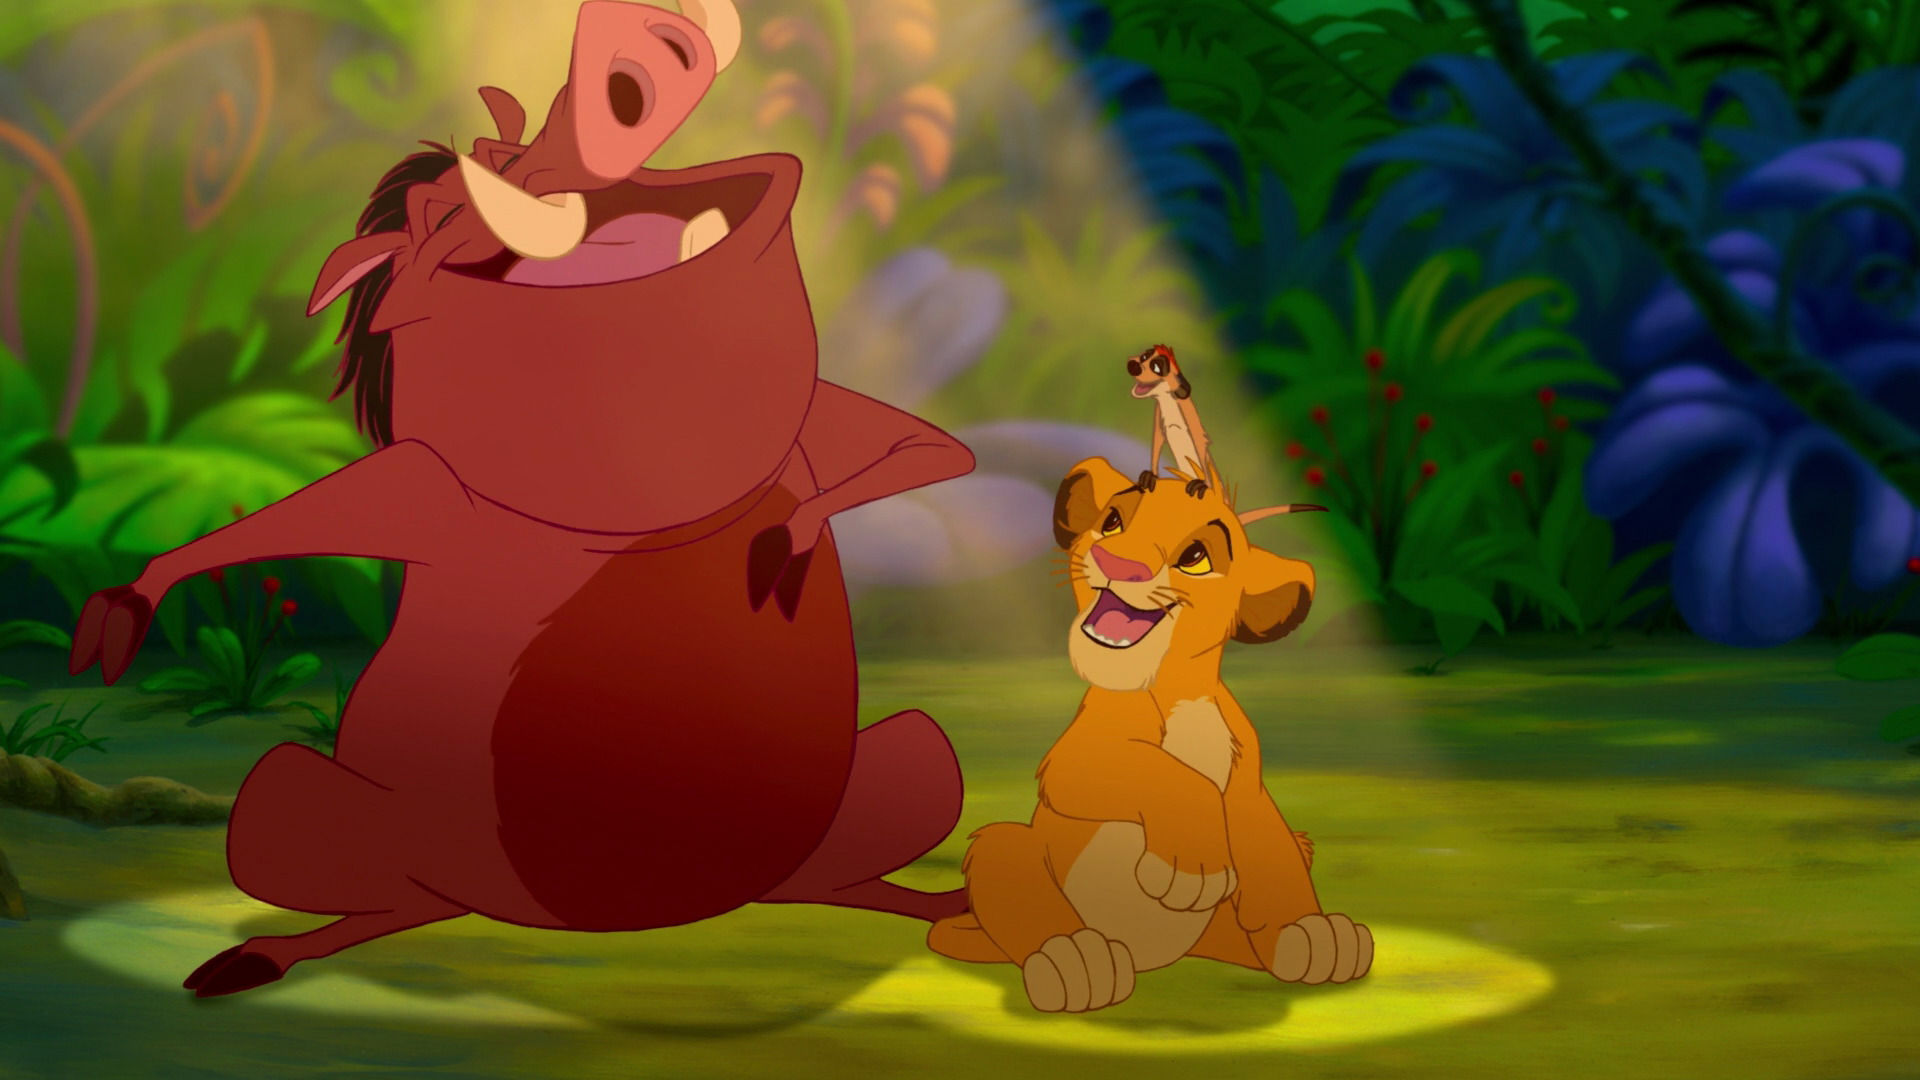 Disney has been accused of cultural appropriation for trademarking the Swahili phrase “hakuna matata”, popularised by the 1994 film The Lion King. 